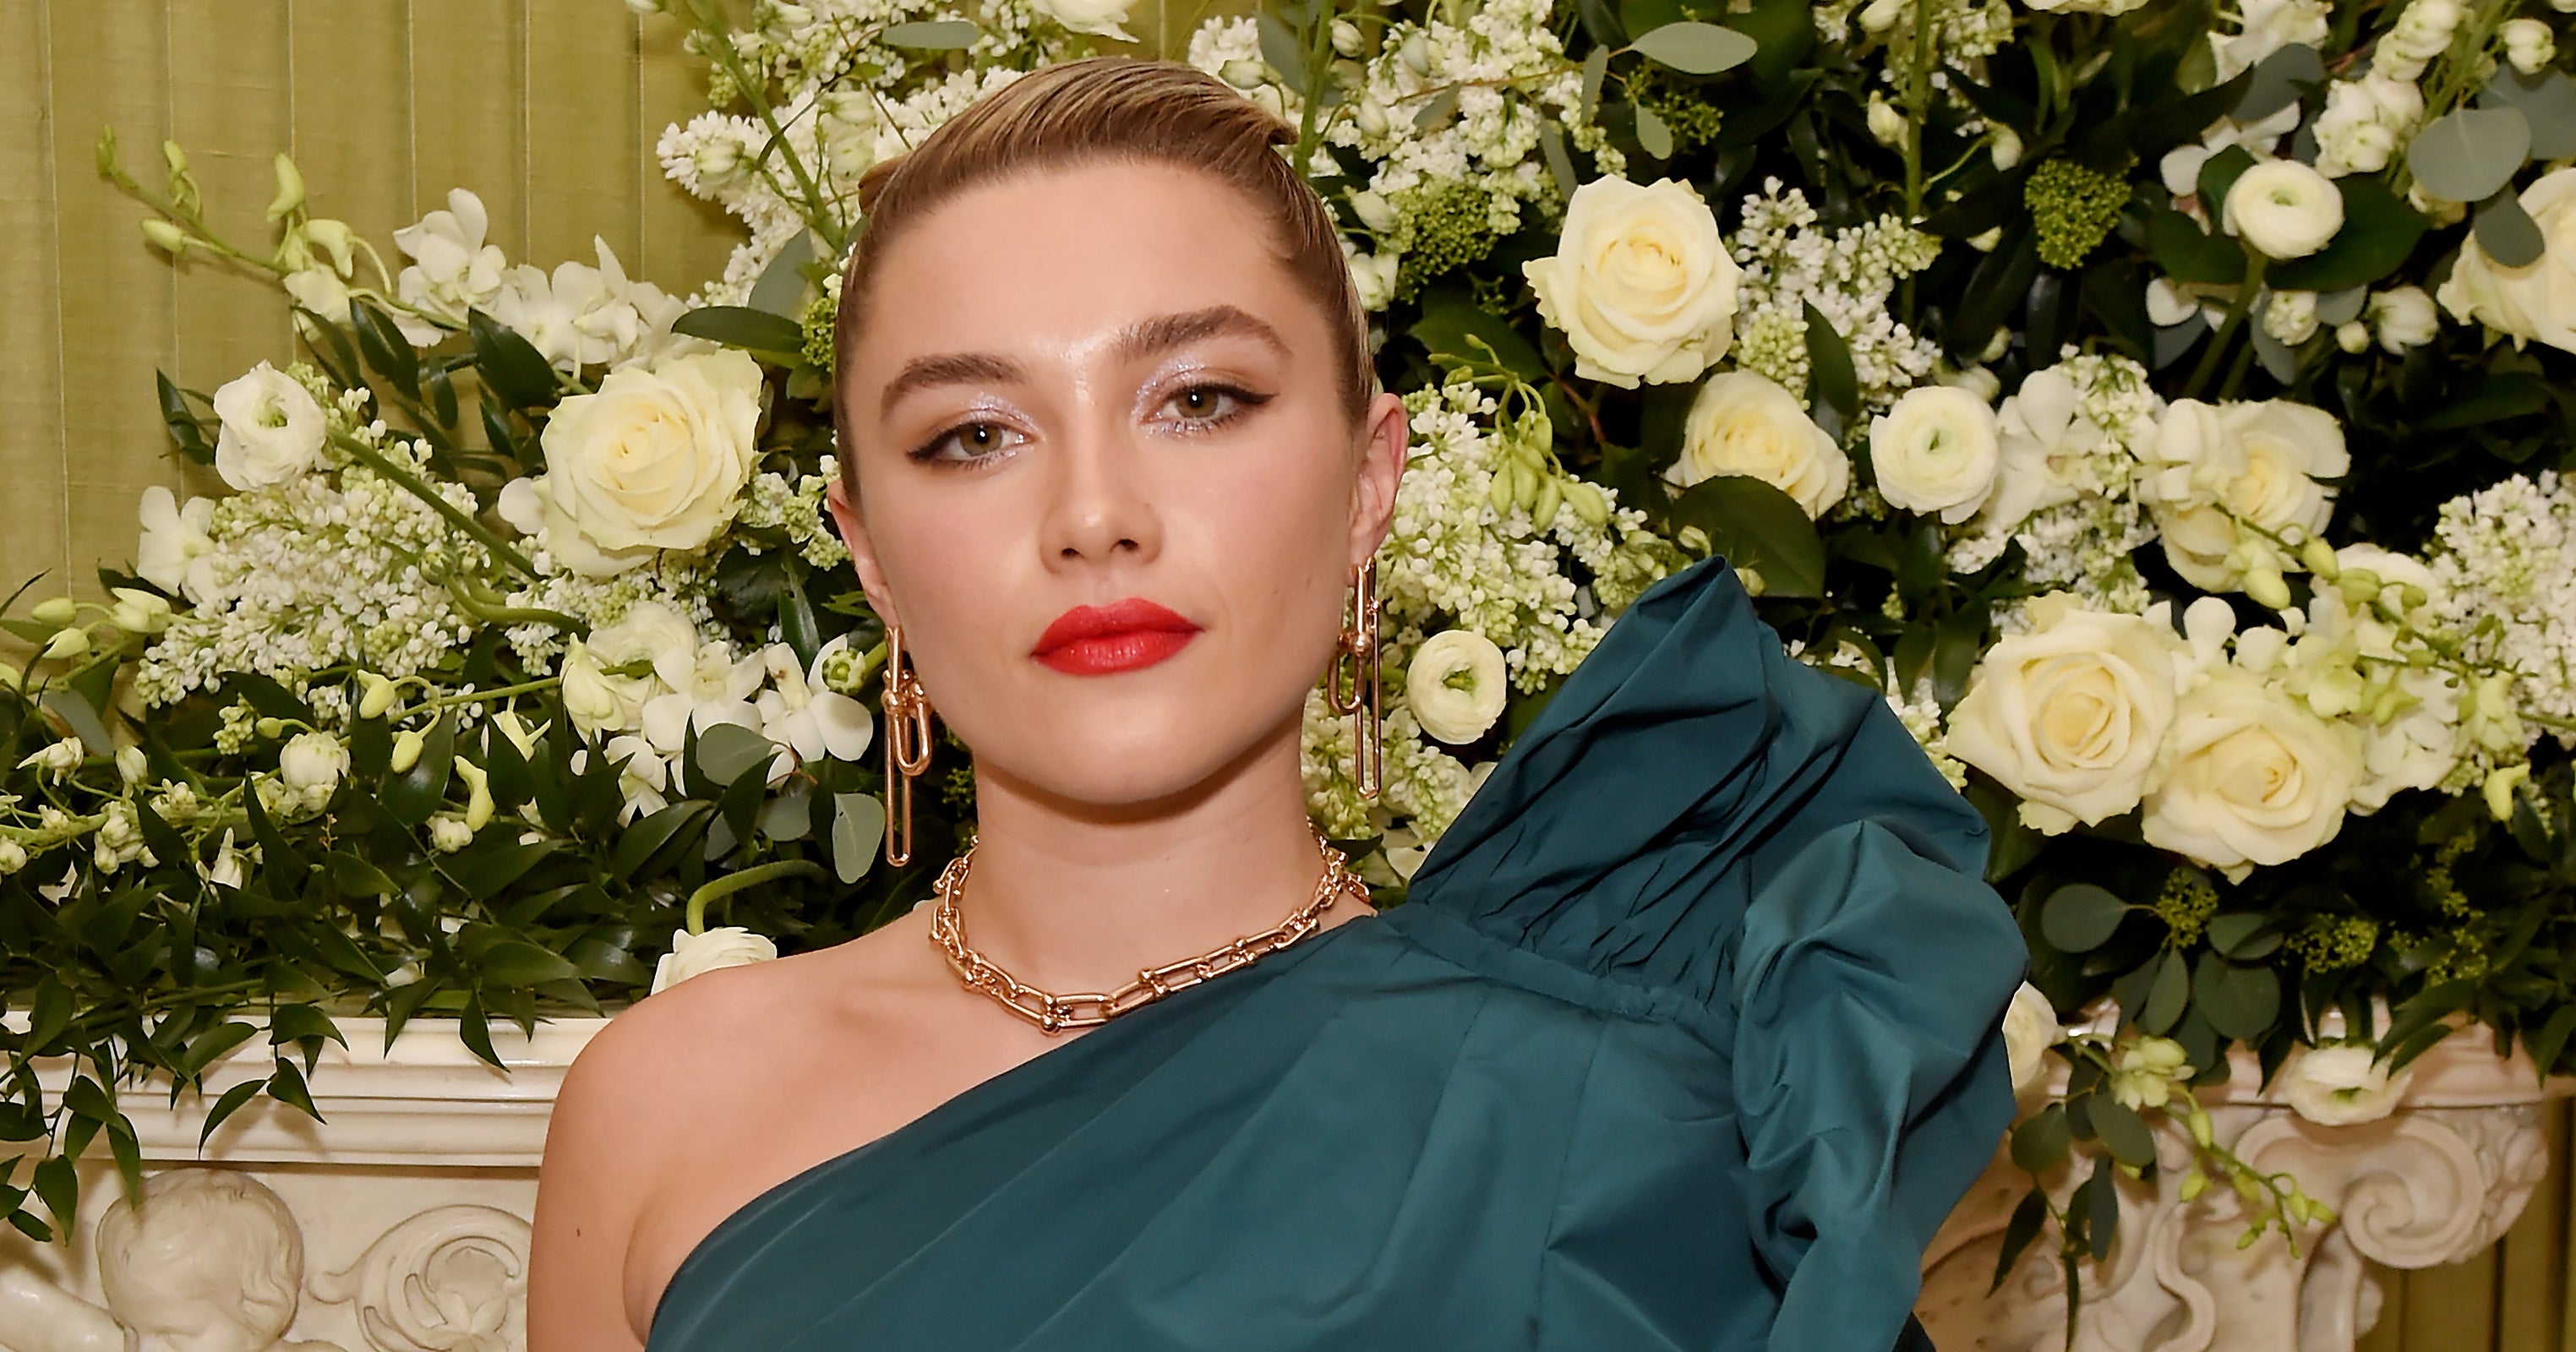 How Long Have Florence Pugh And Zach Braff Been Dating?